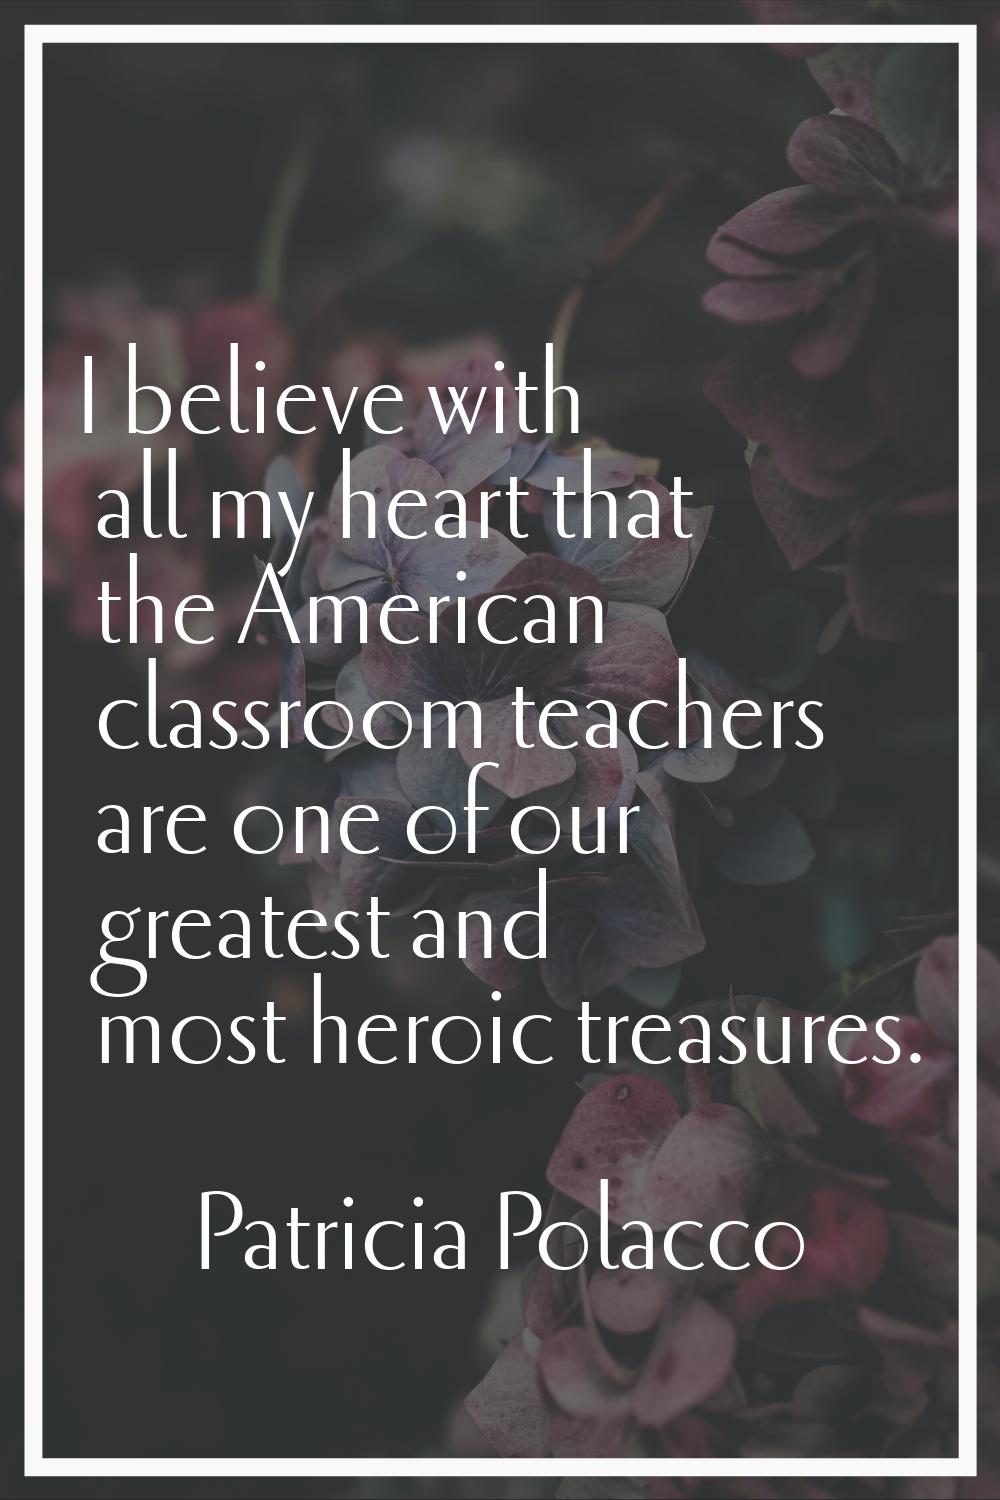 I believe with all my heart that the American classroom teachers are one of our greatest and most h